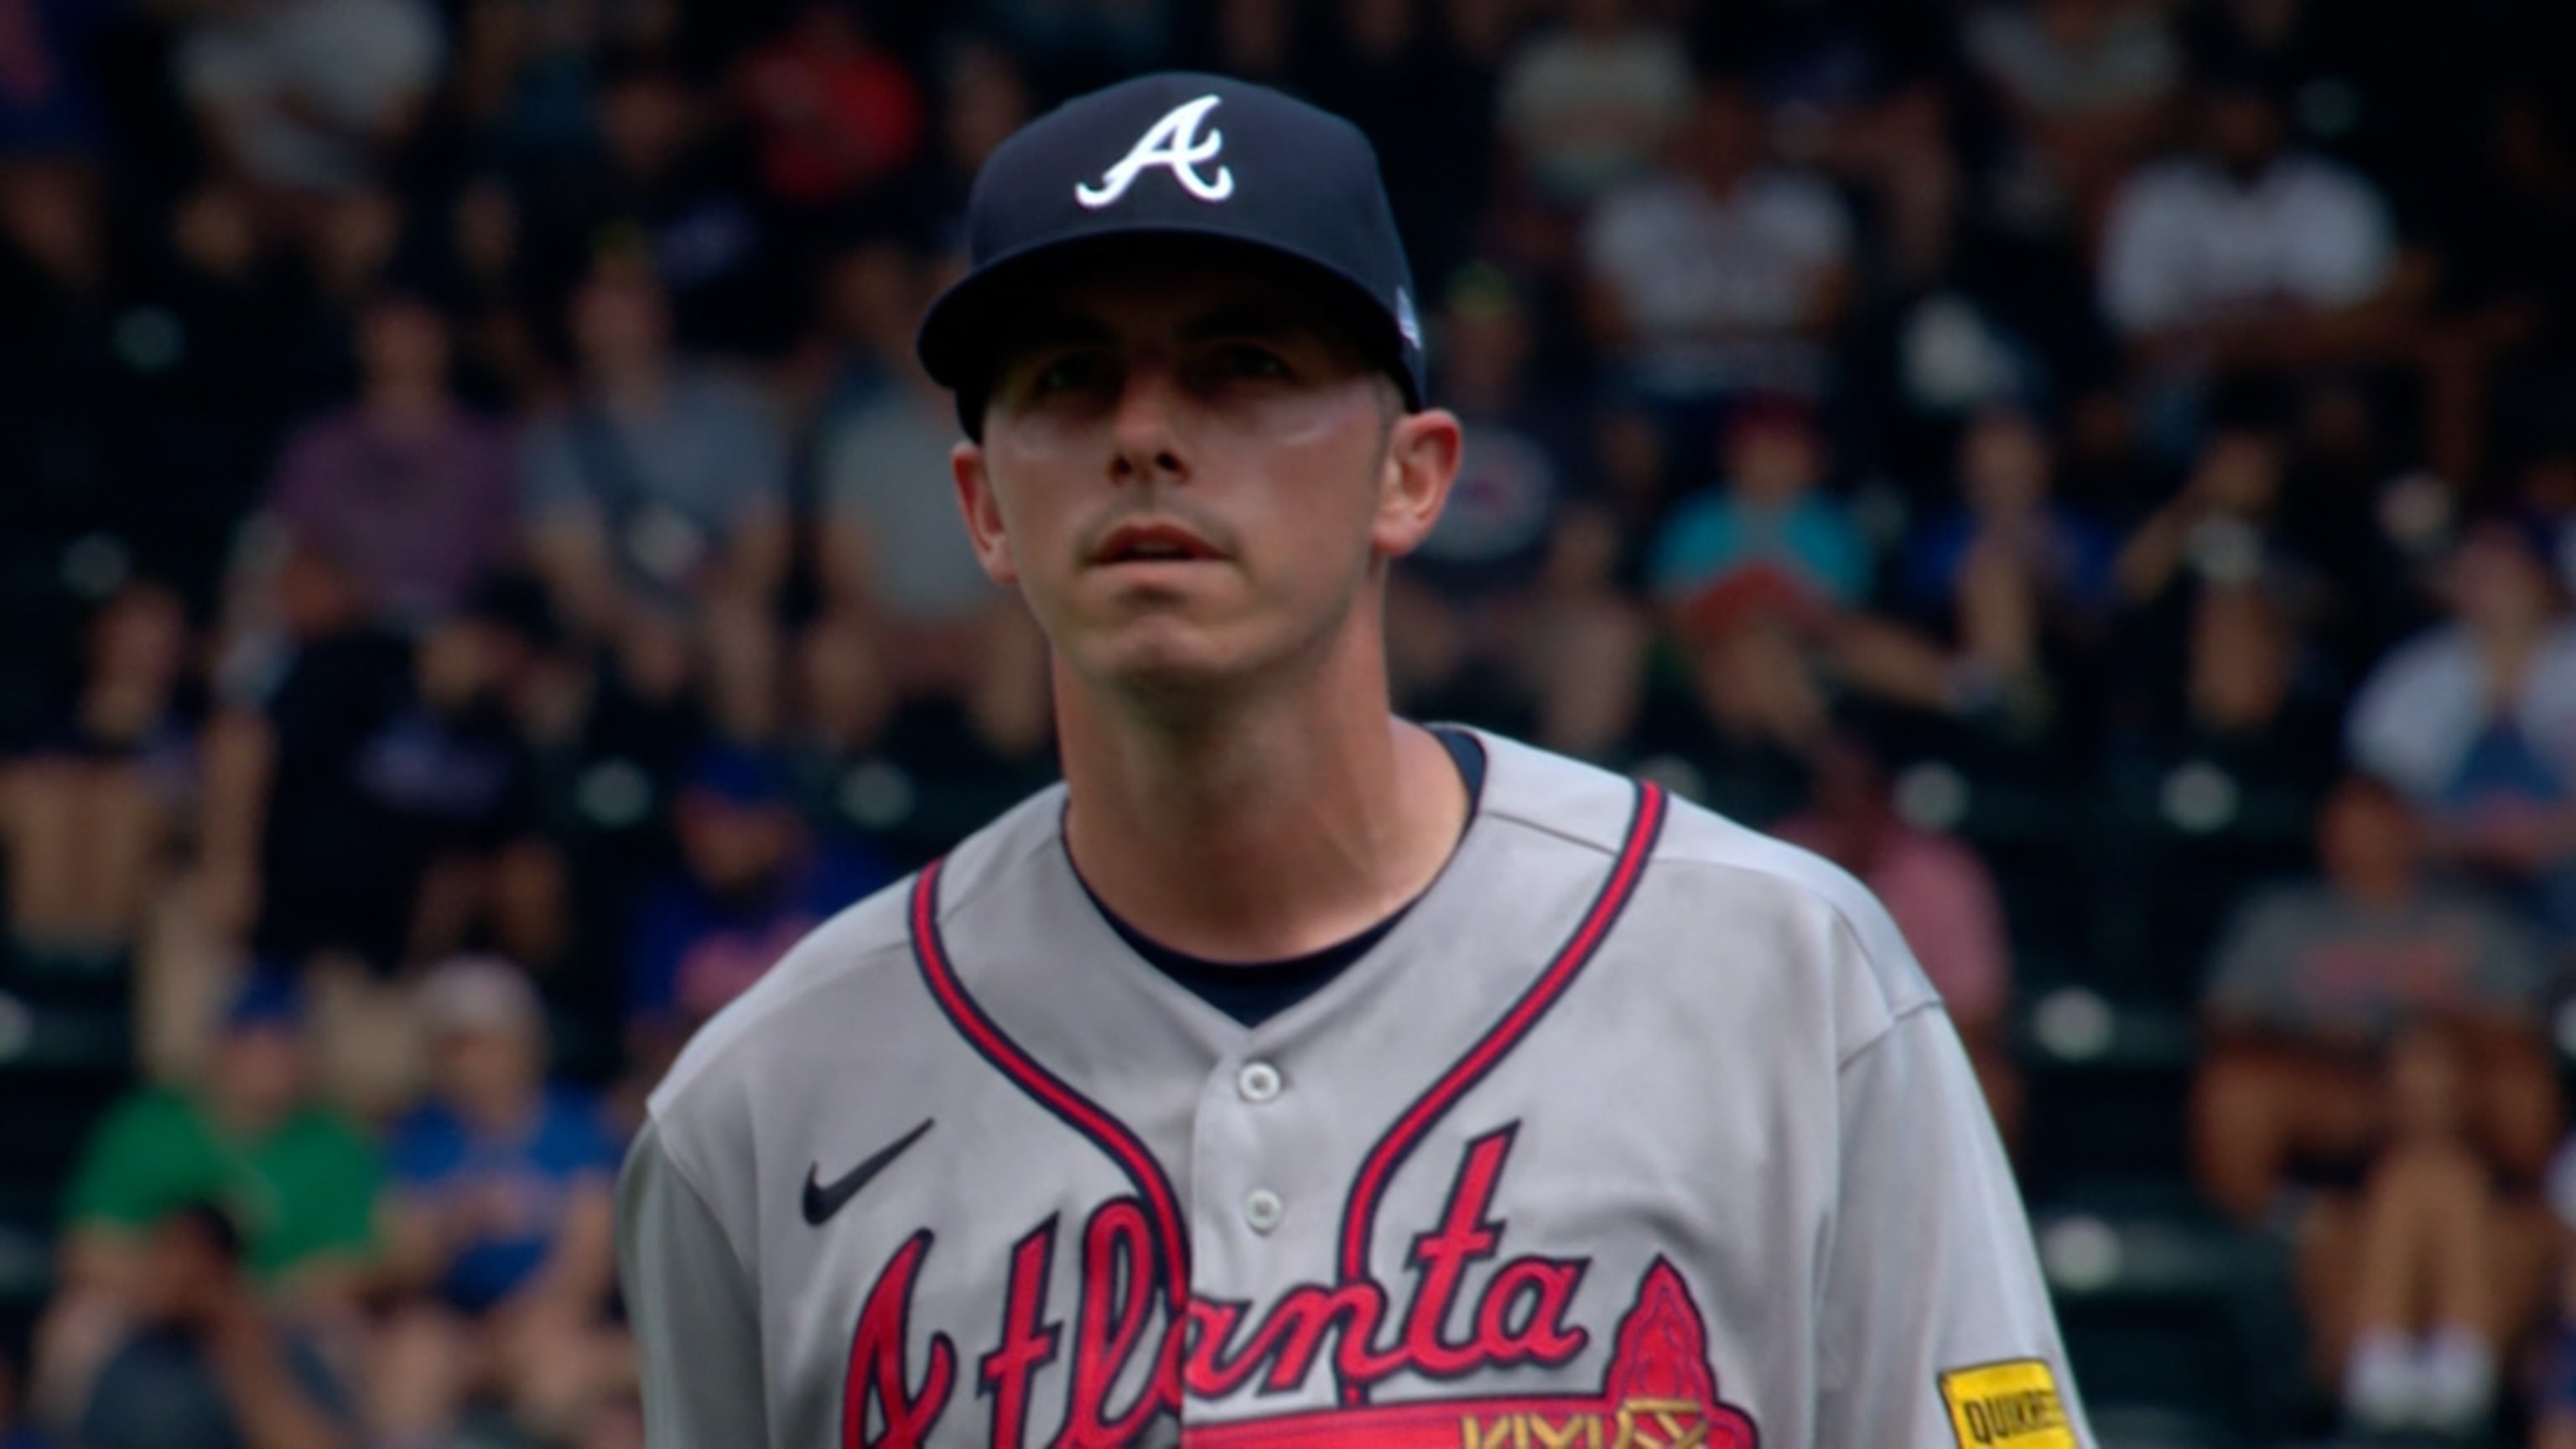 Take a special look at the @Braves City Connect uniforms with me